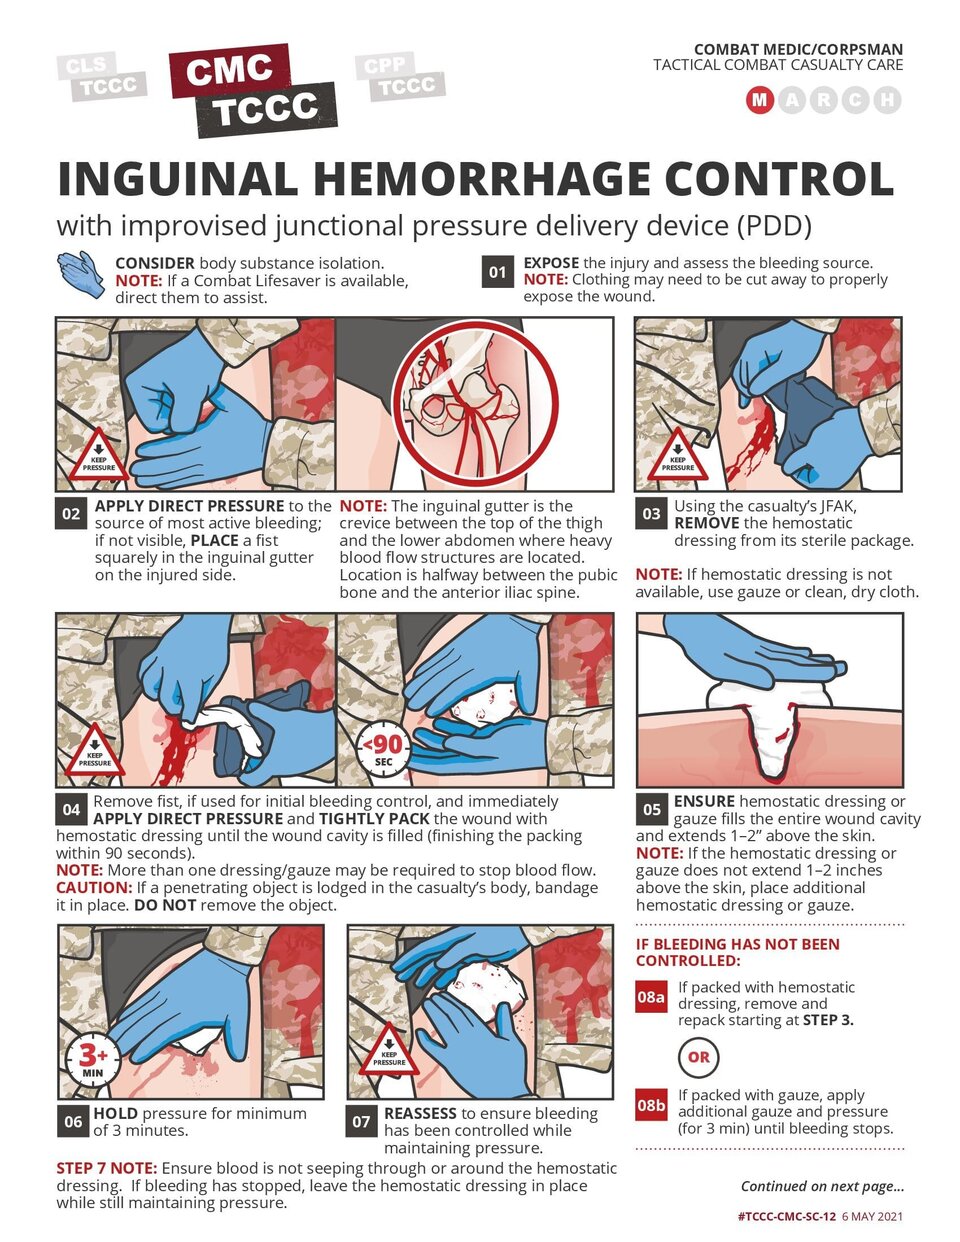 Inguinal hemorrhage control with improvised junctional PDD